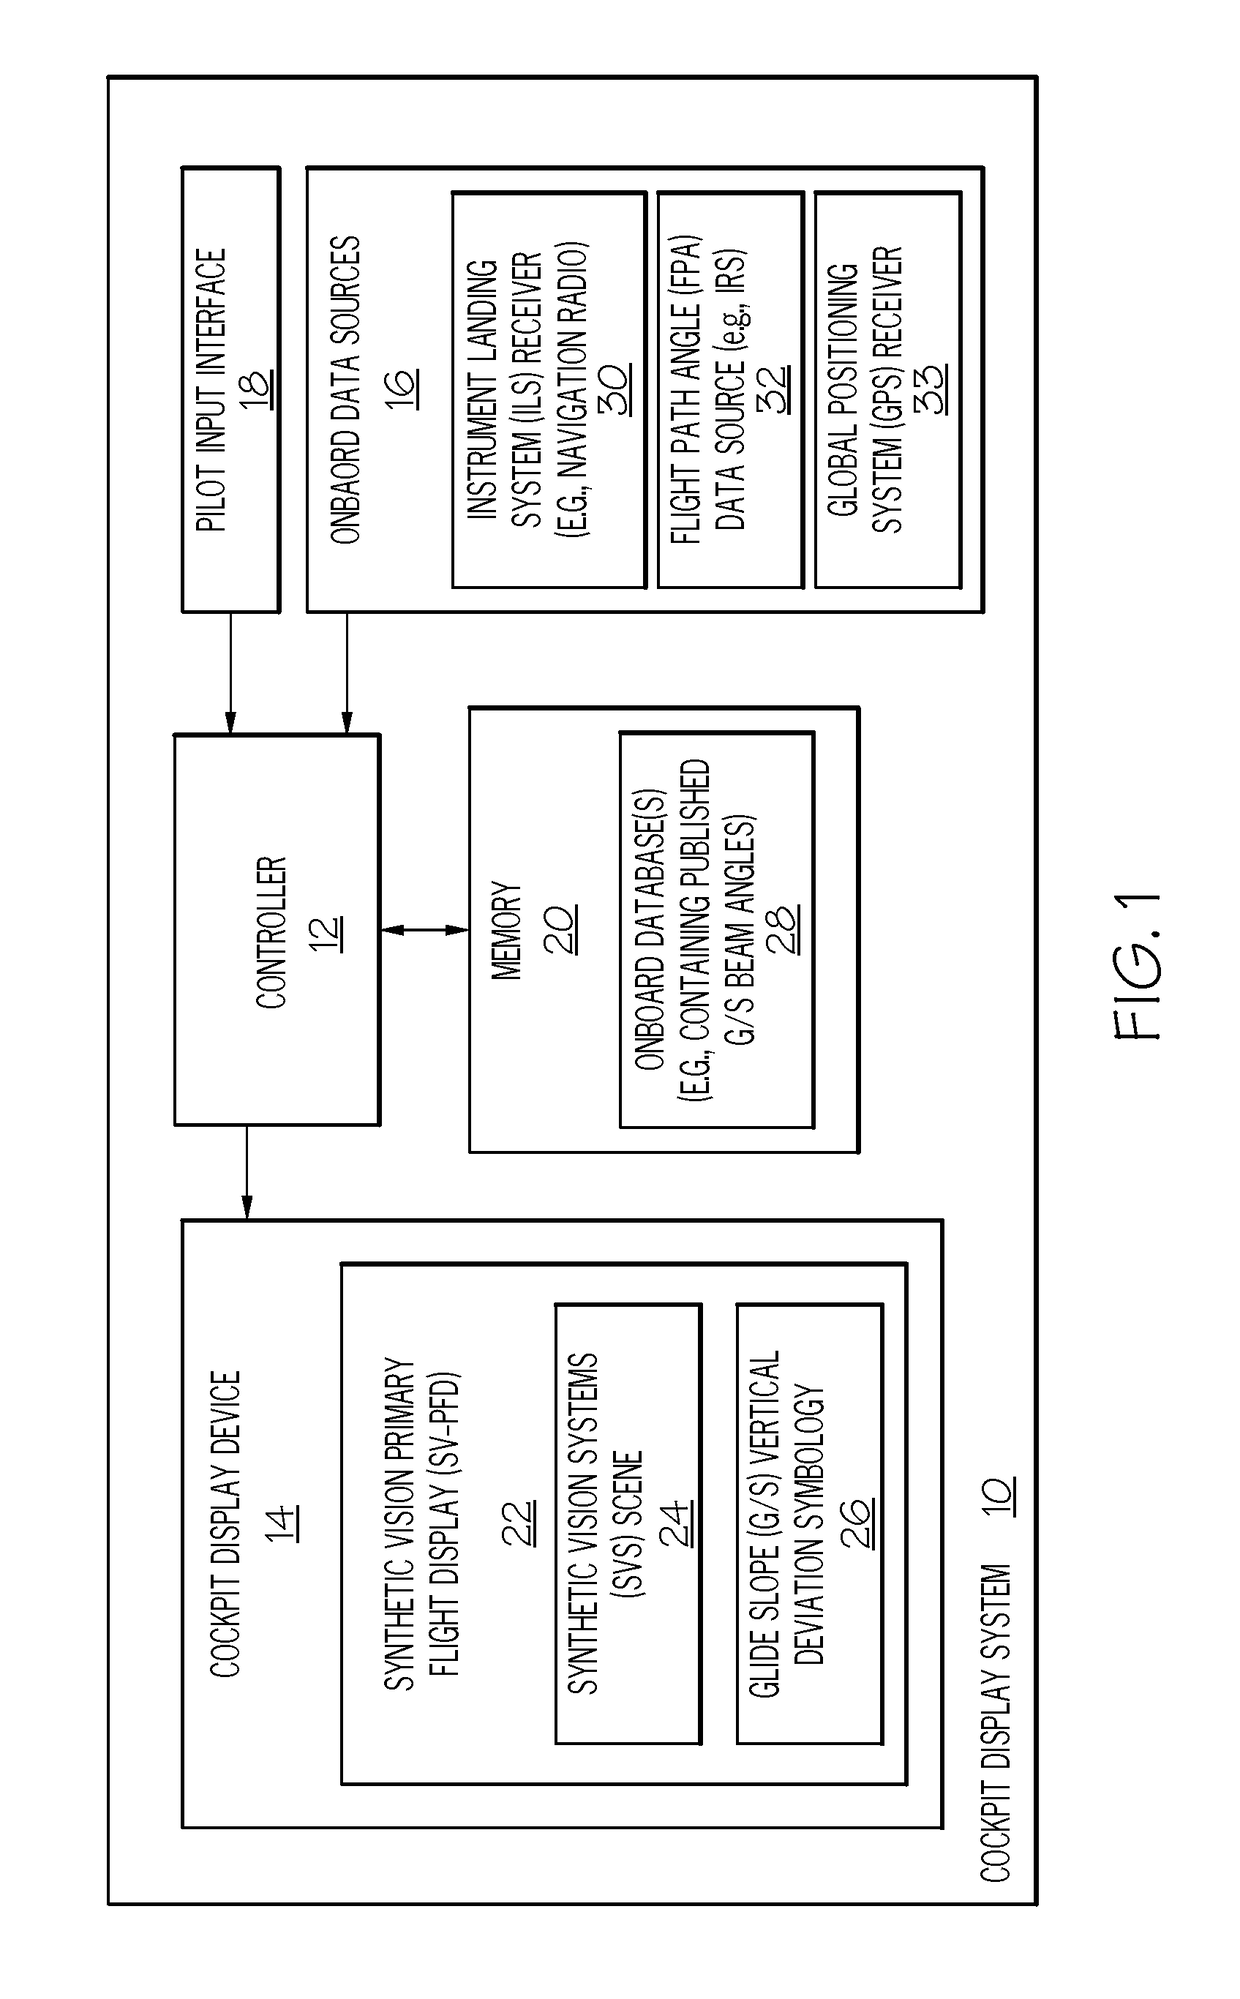 Cockpit display systems and methods for performing glide slope validation processes during instrument landing system approaches